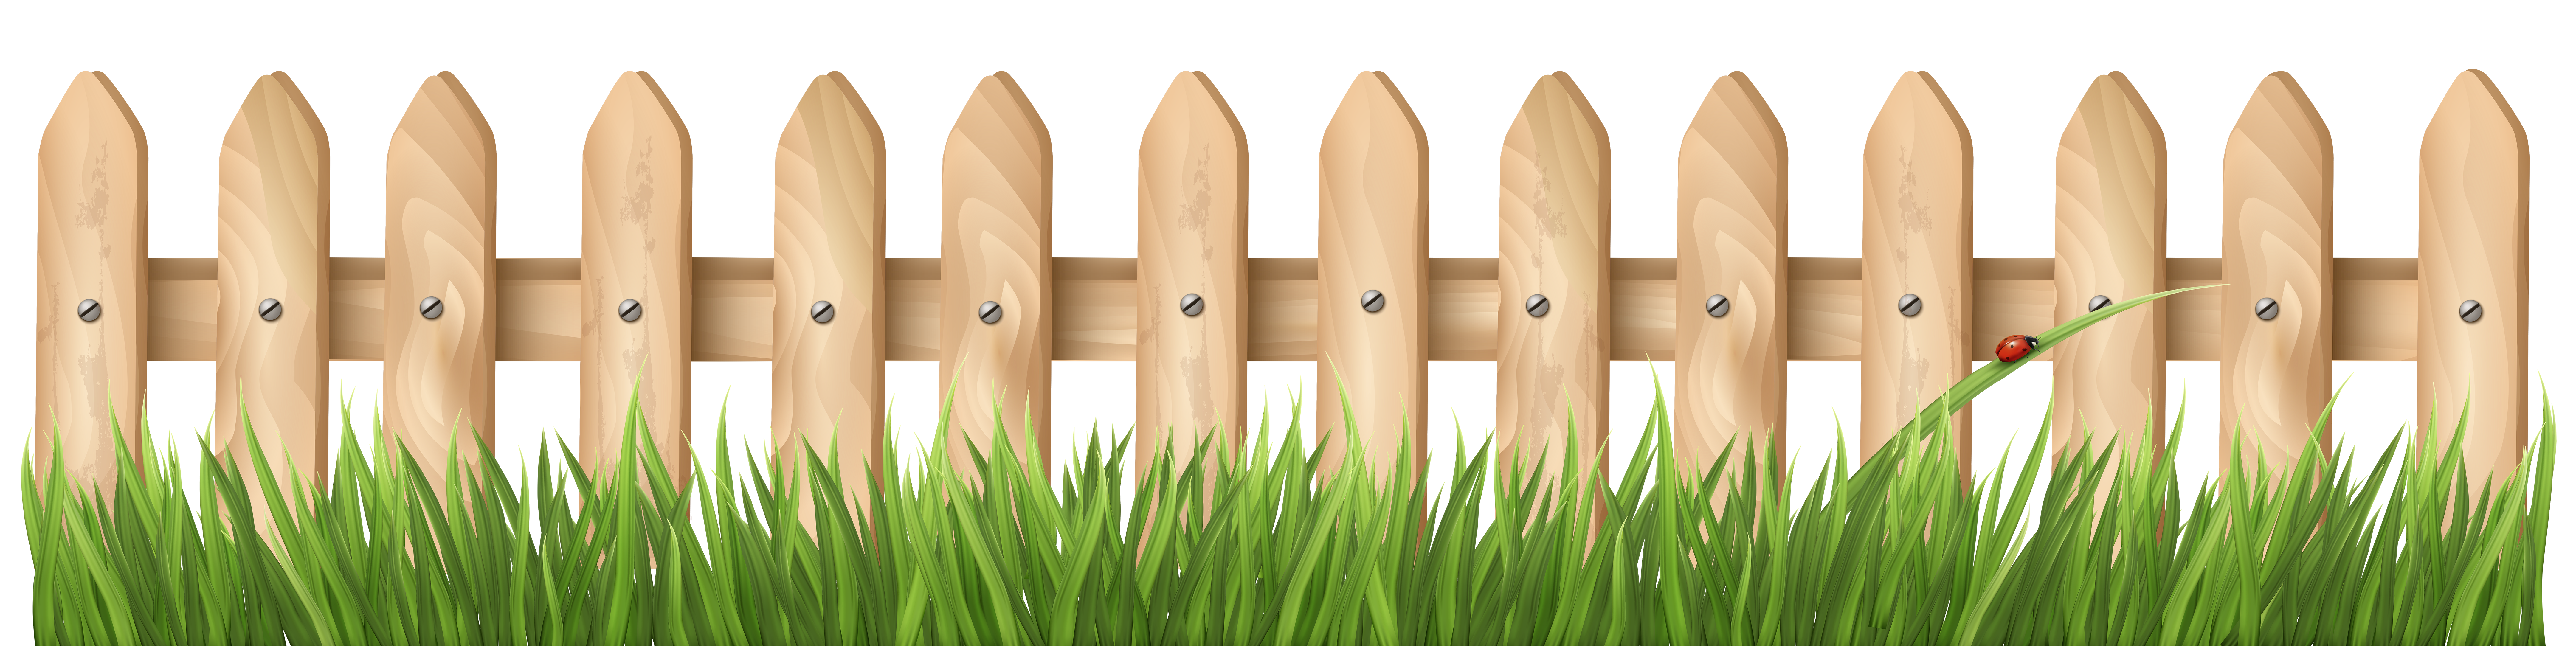 Transparent fence with grass. Fencing clipart fens